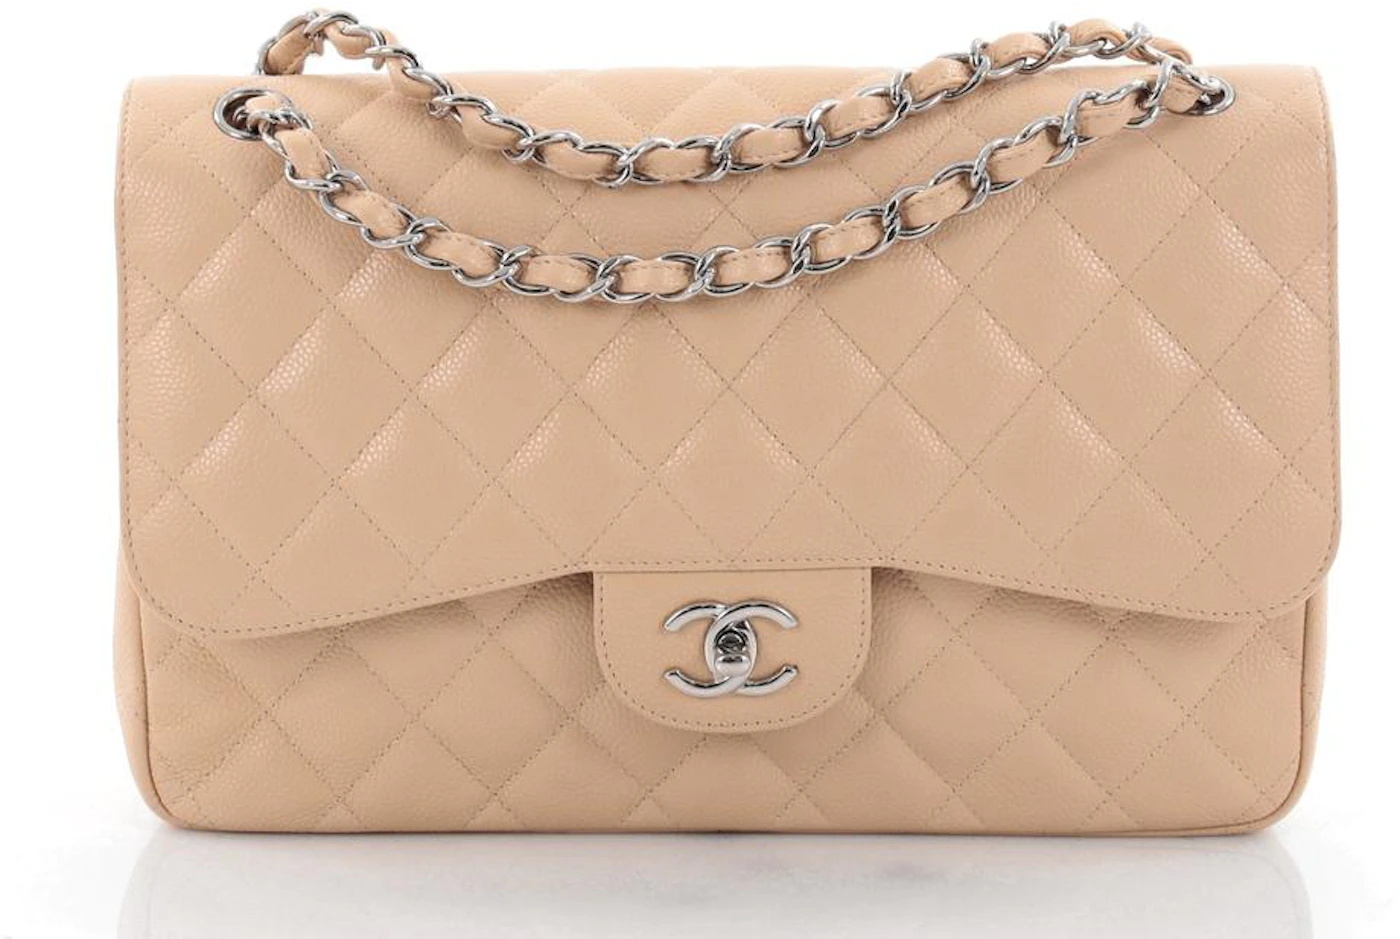 Chanel Beige Quilted Caviar New Classic Double Flap Jumbo